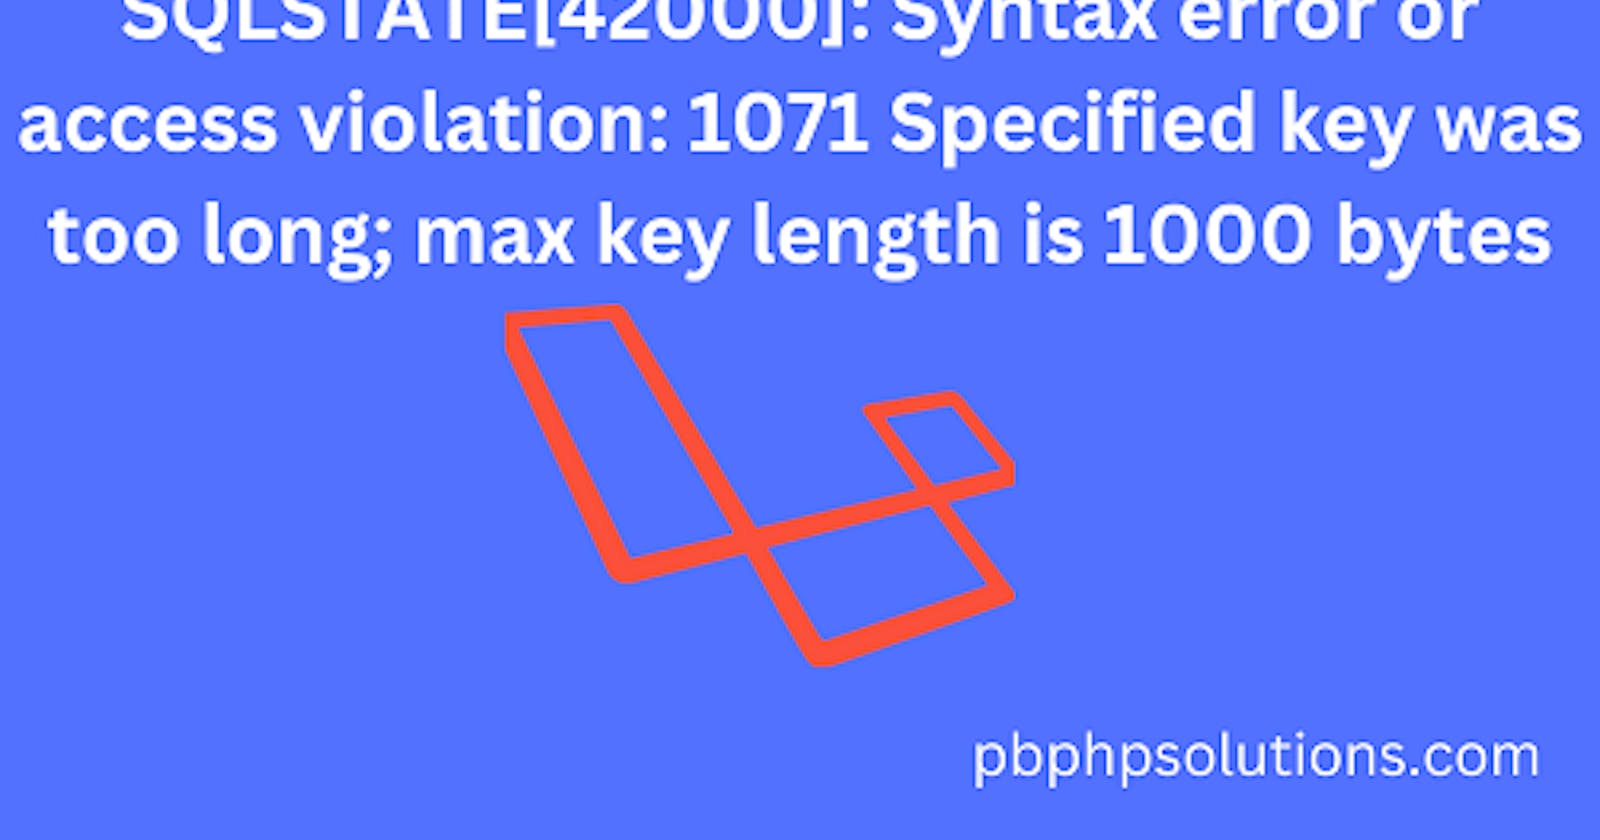 SQLSTATE[42000]: Syntax error or access violation: 1071 Specified key was too long; max key length is 1000 bytes